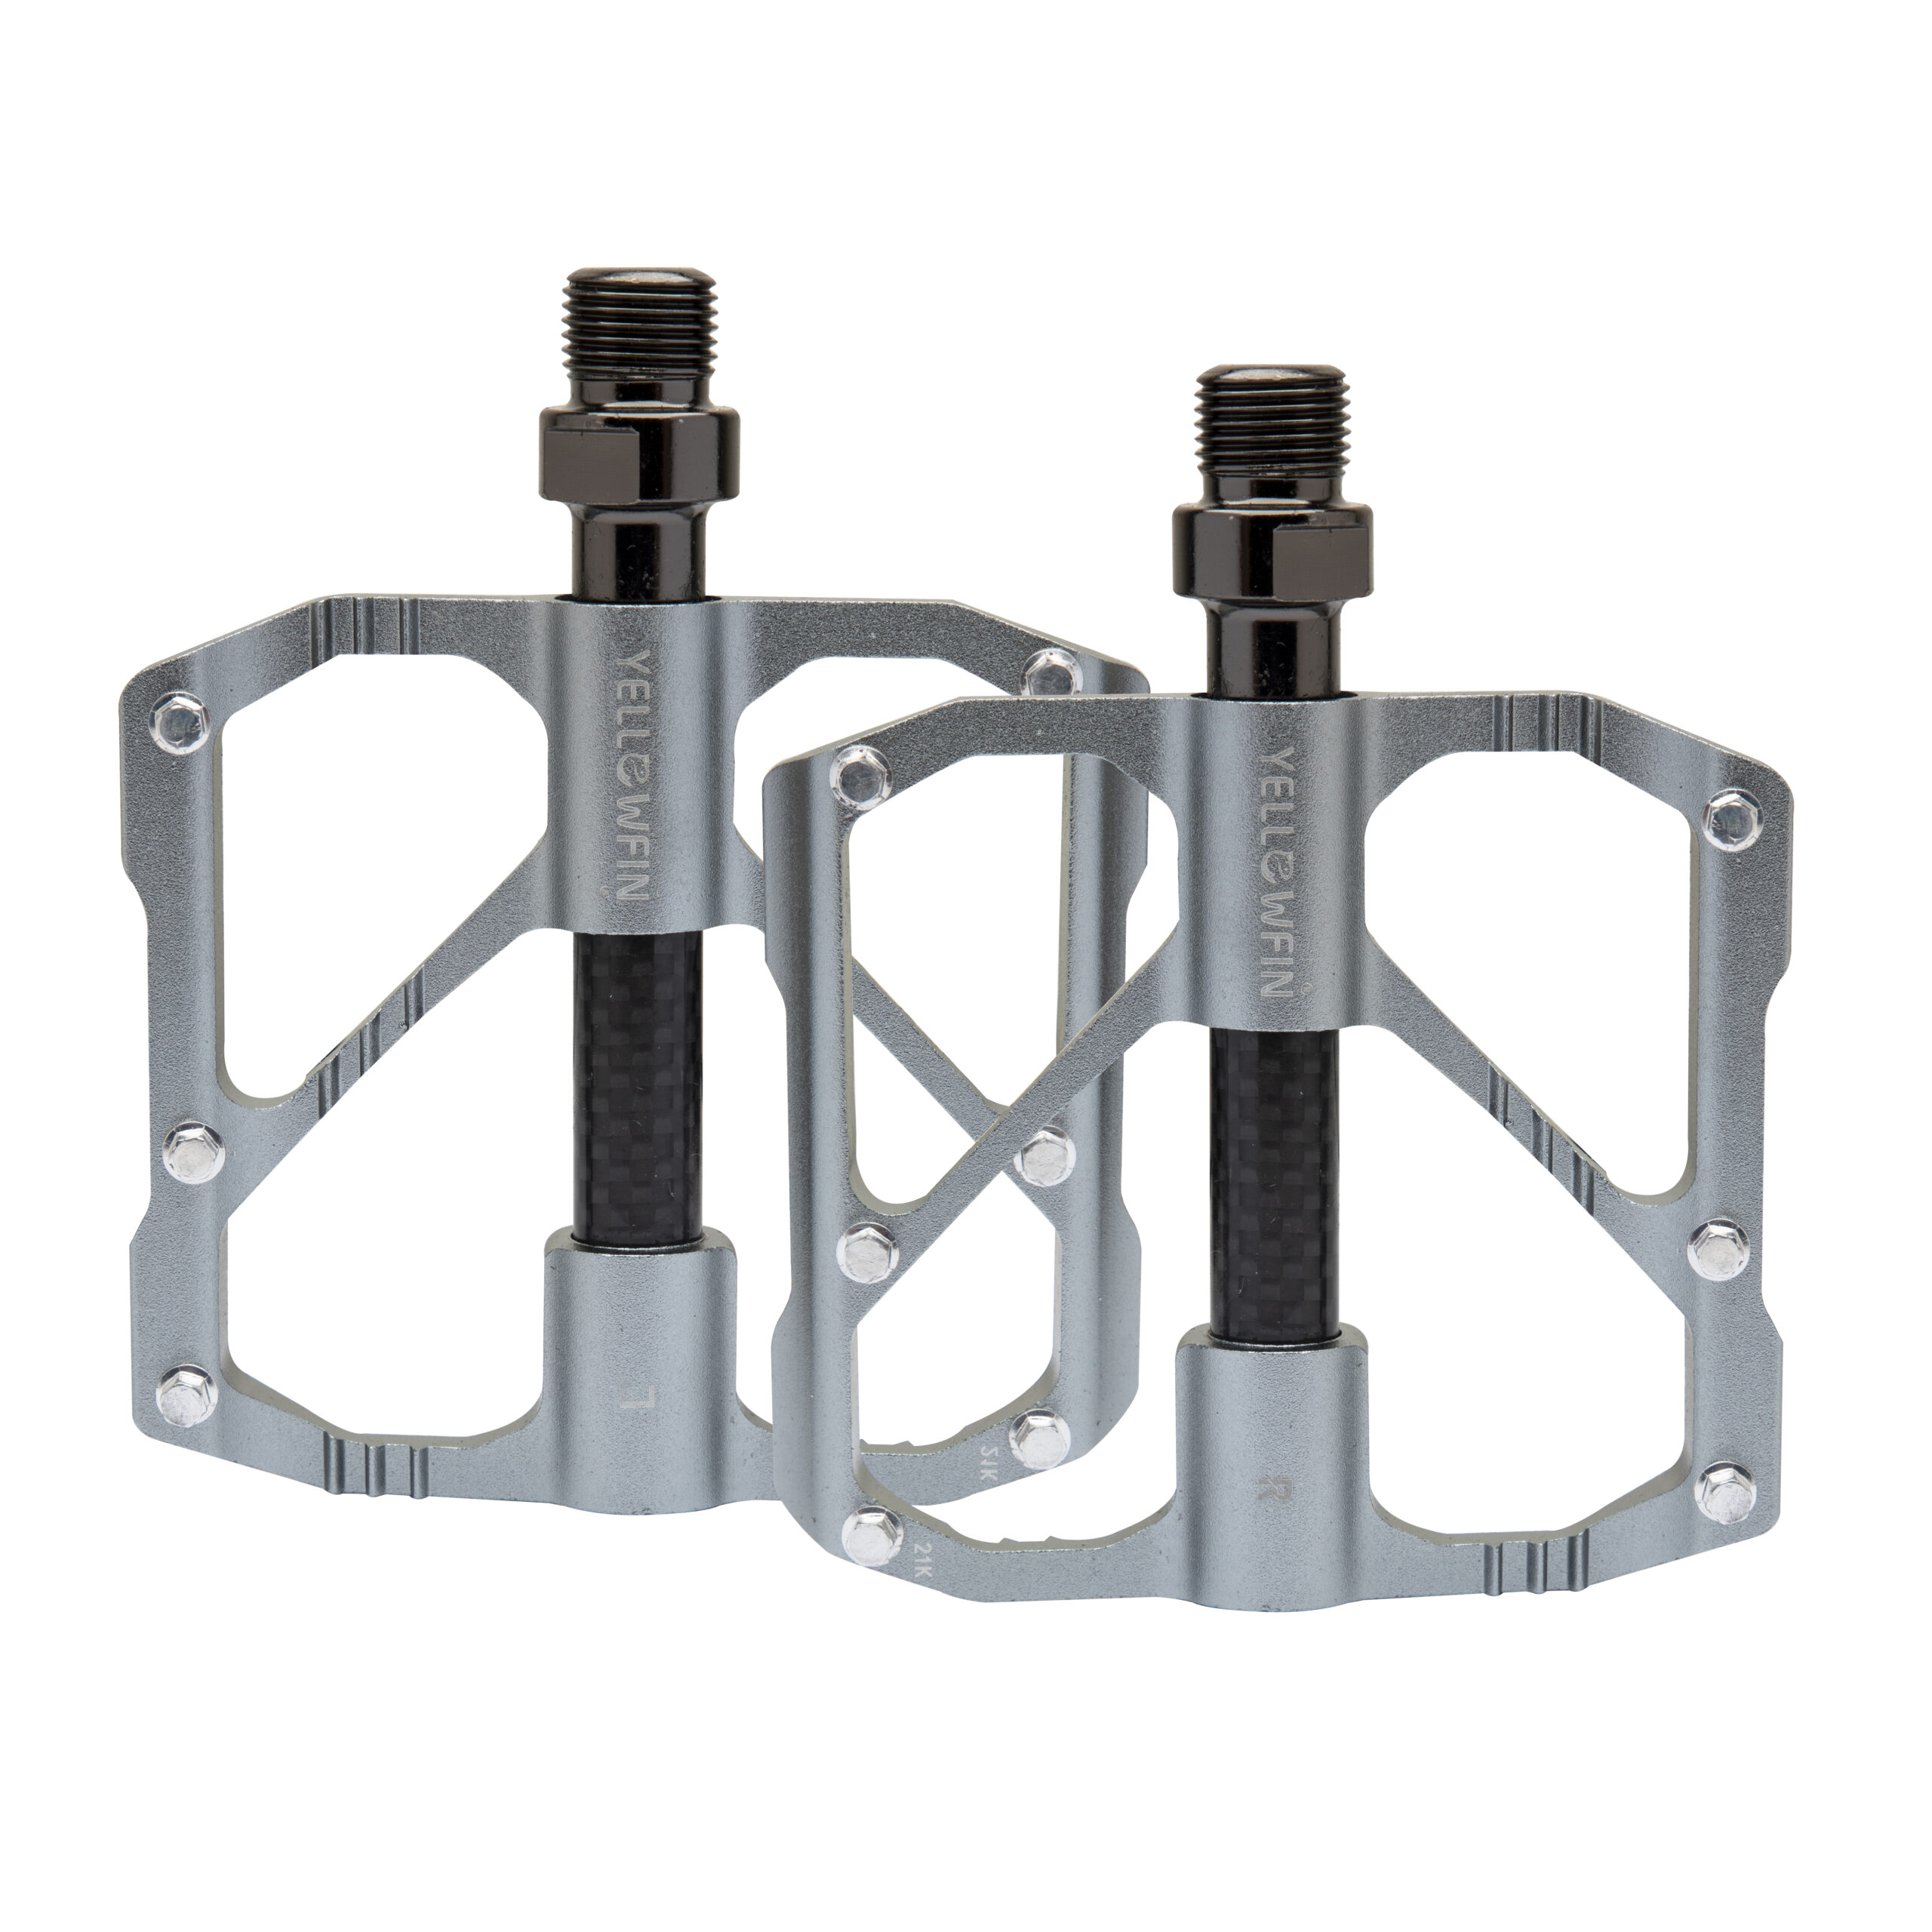 Aluminium Alloy Sealed Bearing Bicycle Pedals (Silver)